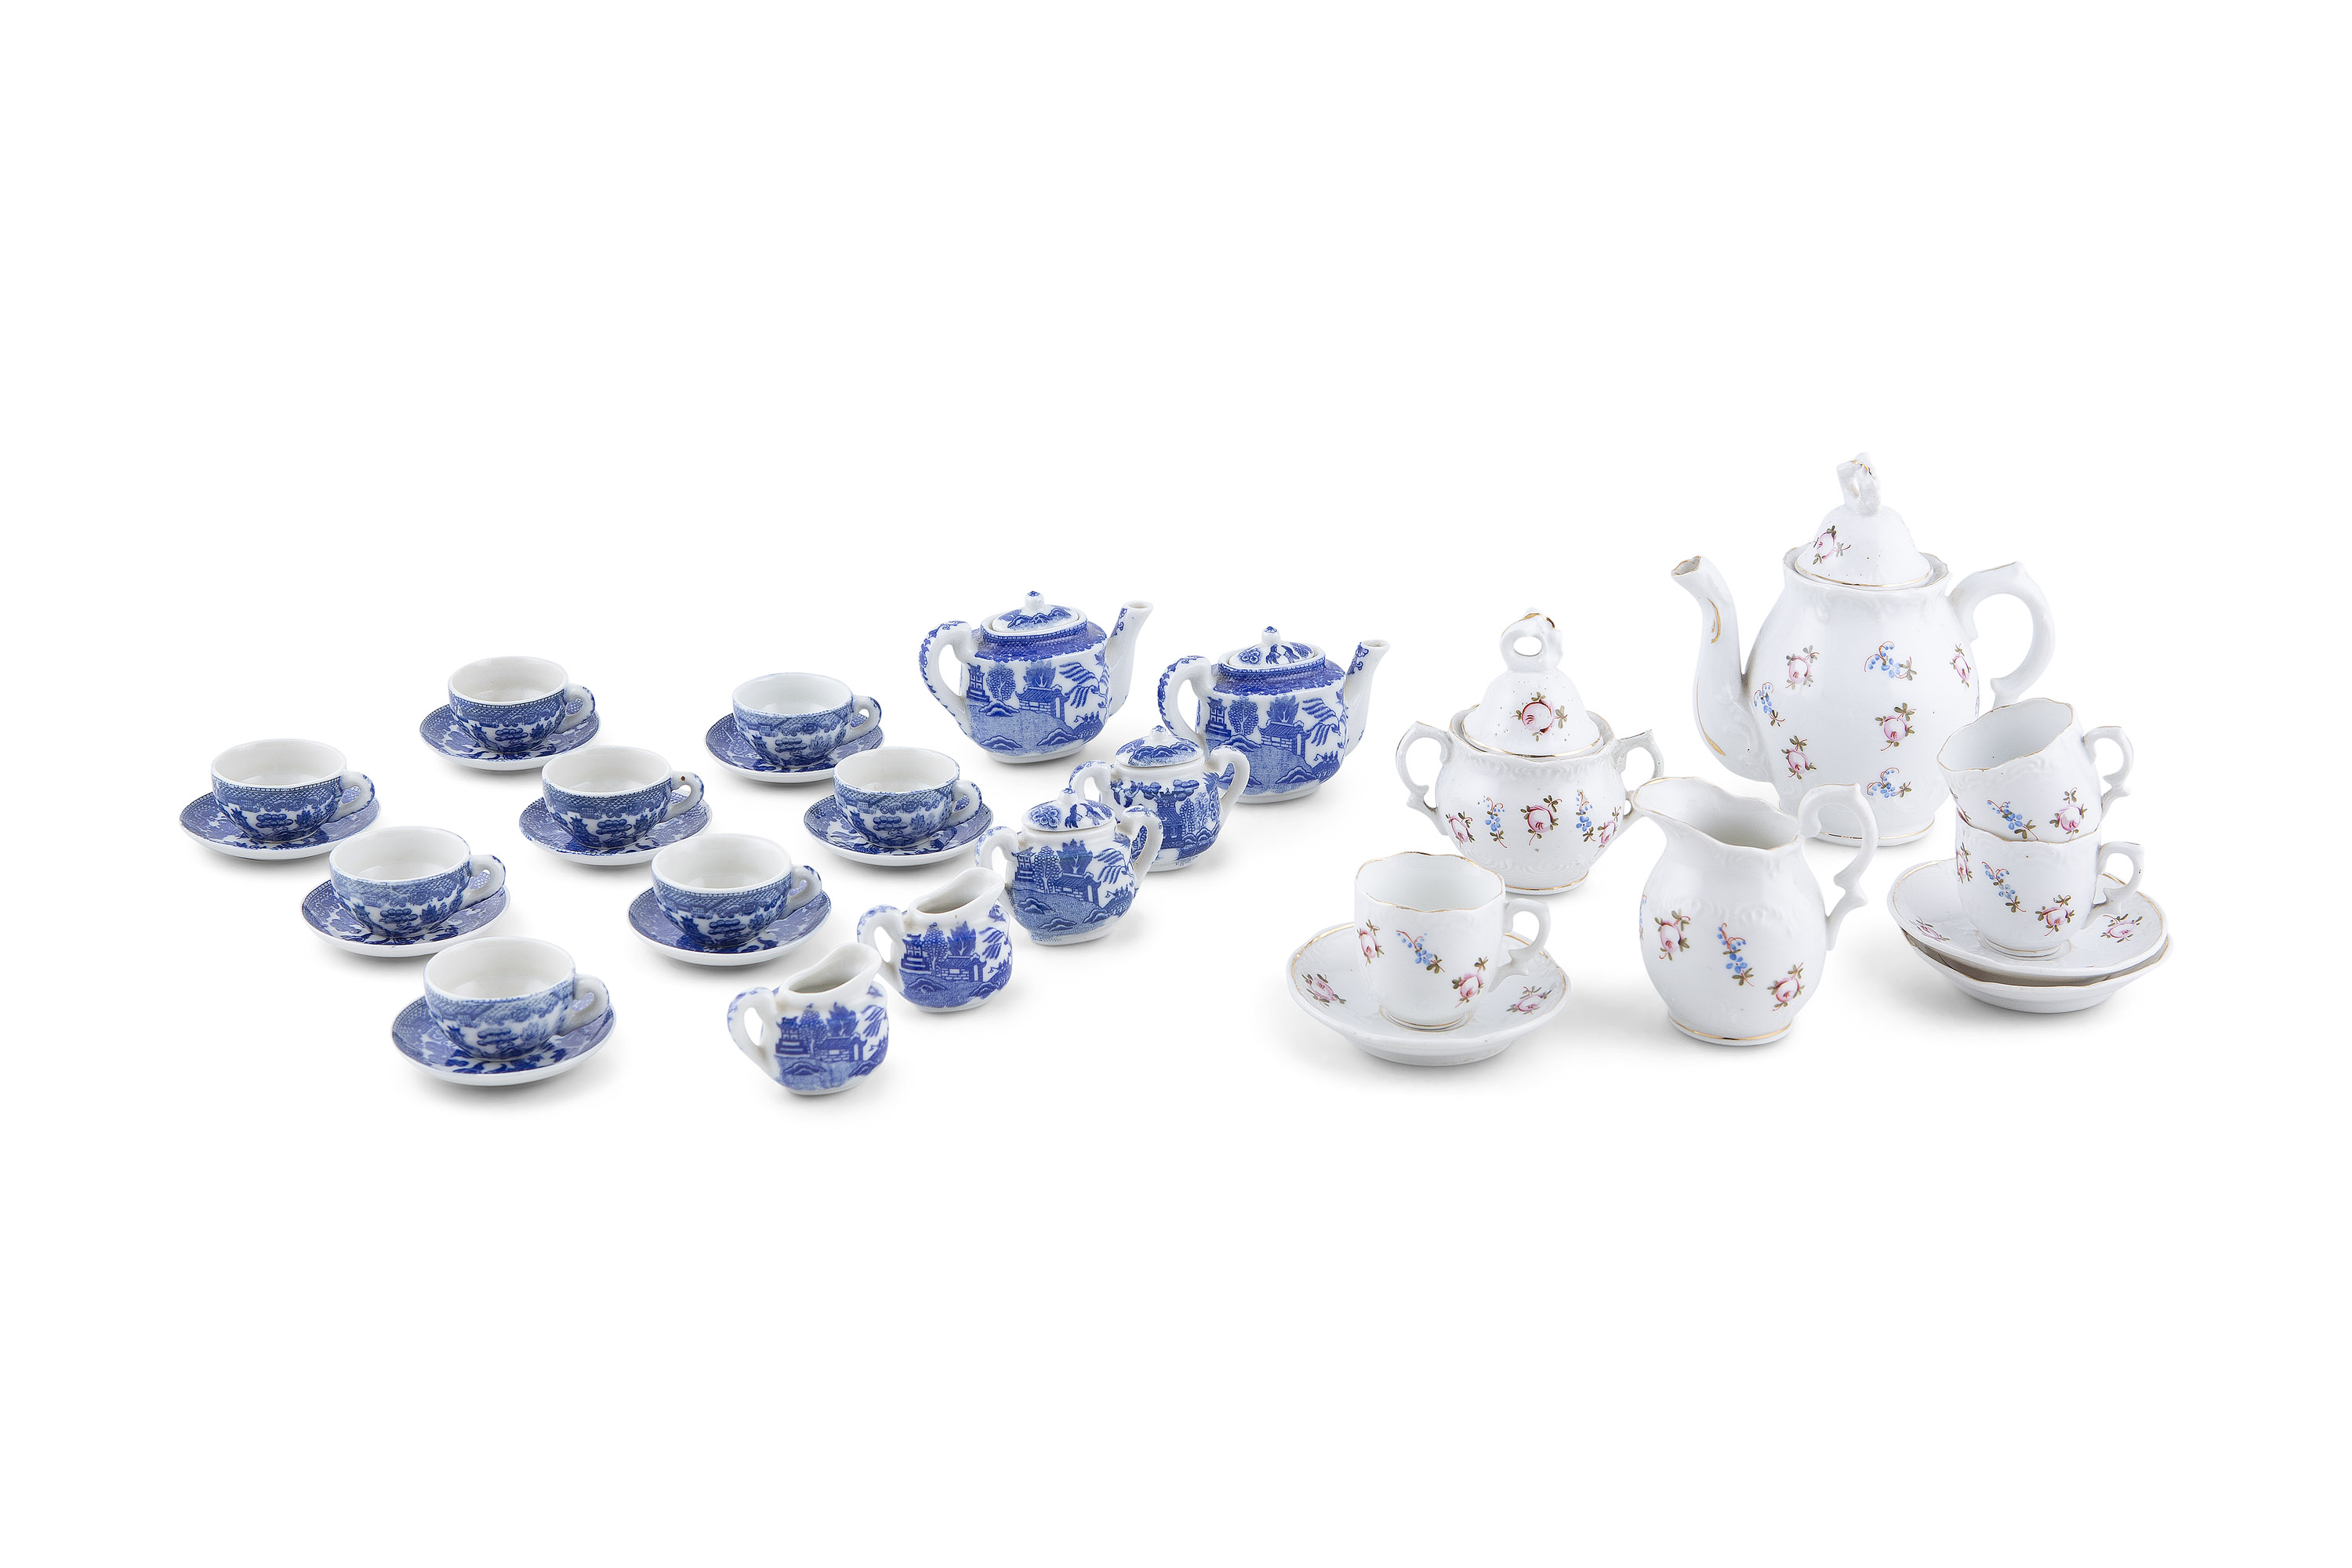 A NOVELTY CHILDS TEA SET, c.1900, transfer printed in blue and white willow pattern, comprising